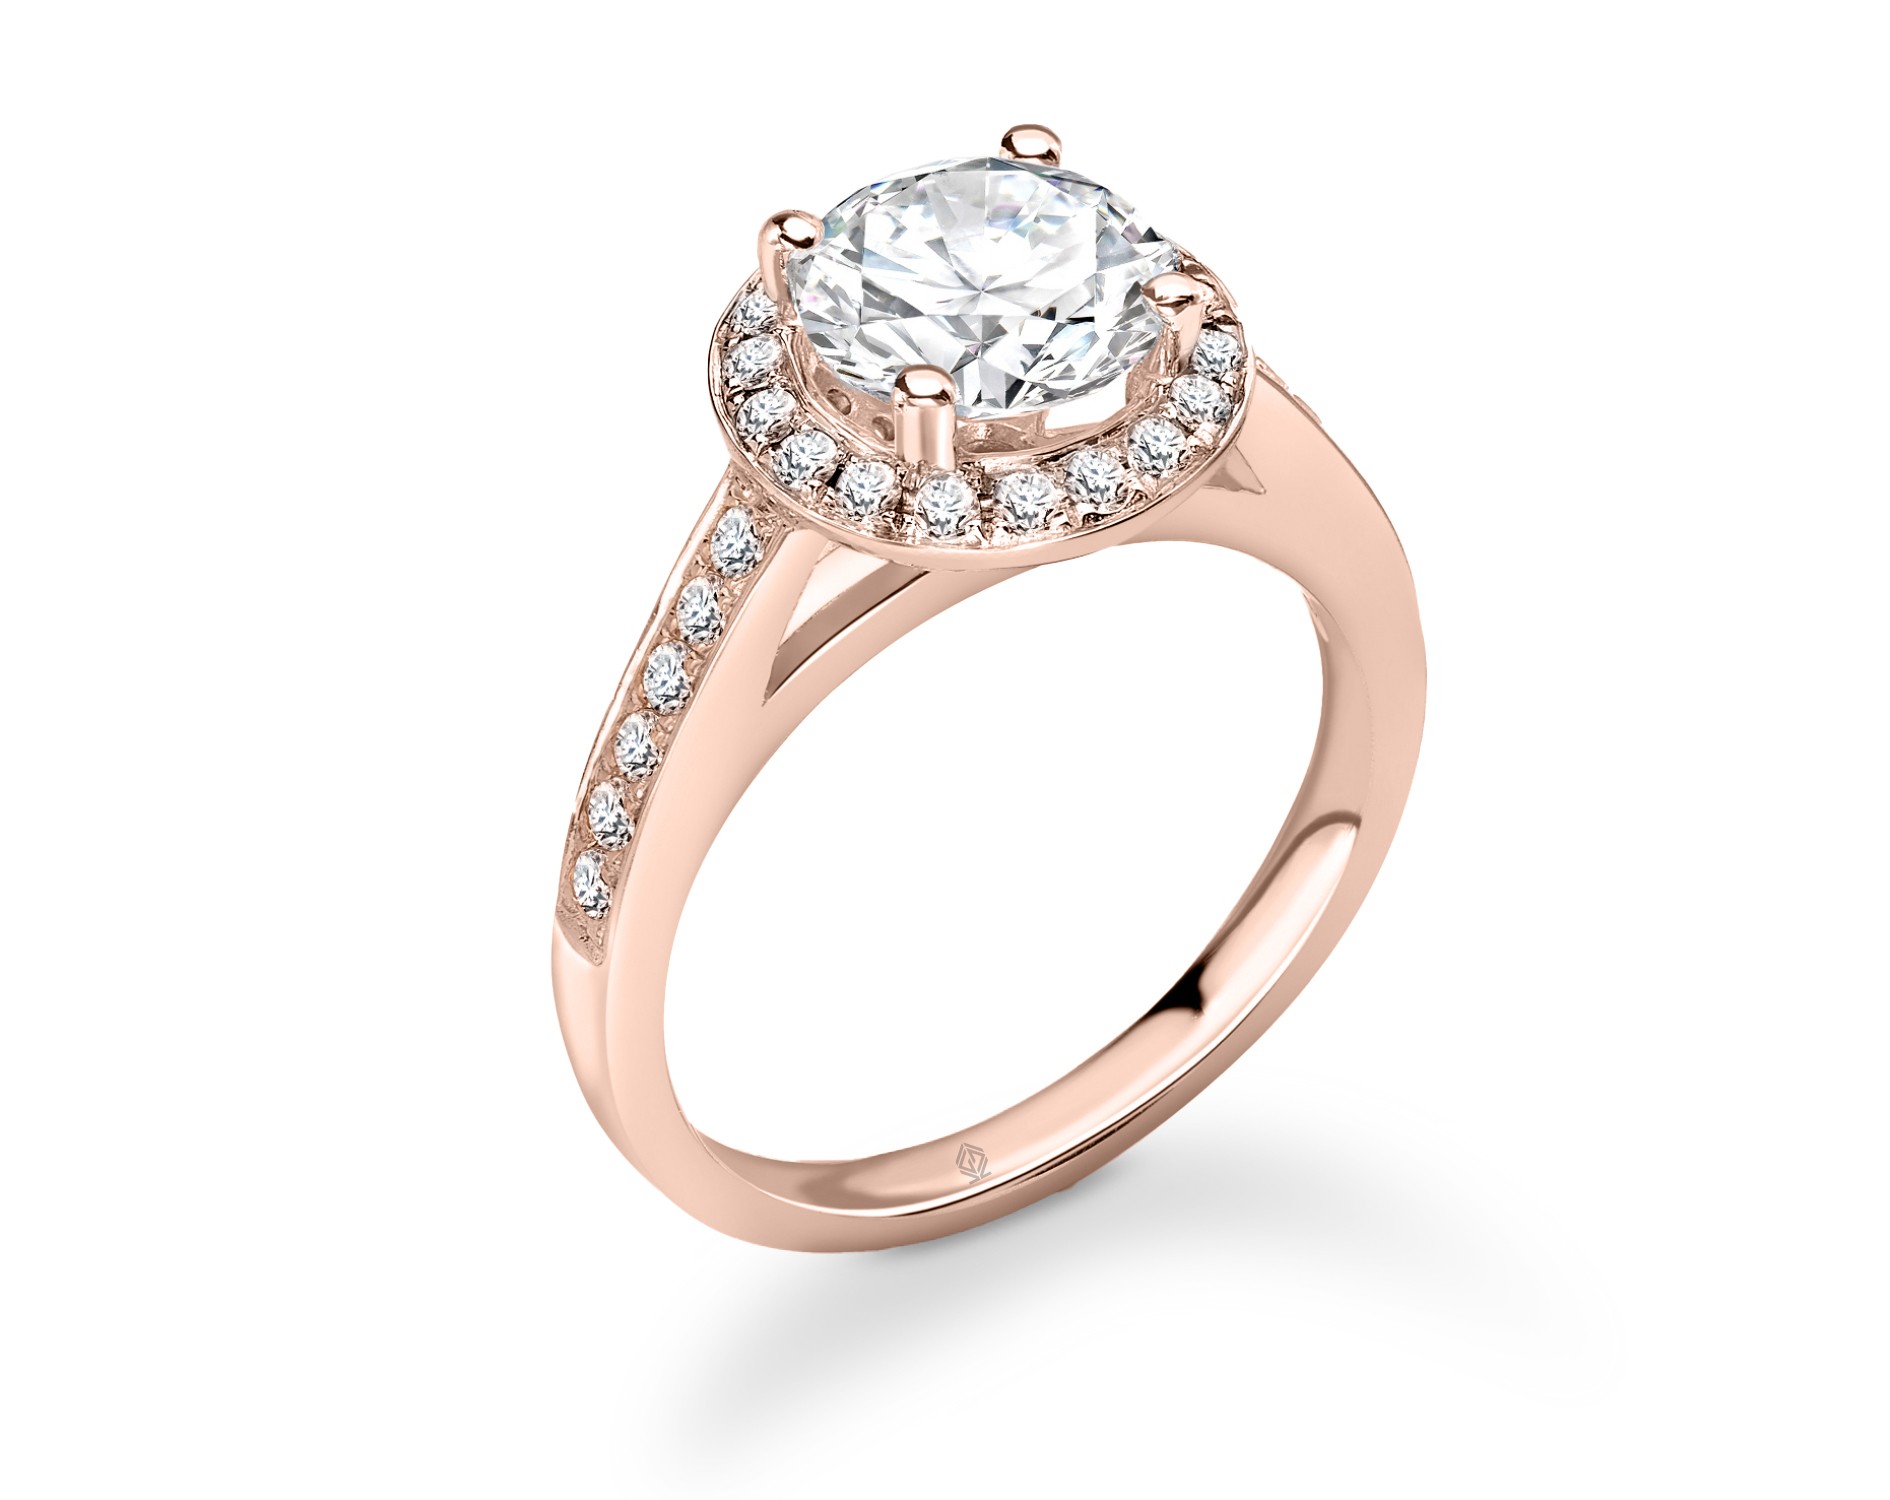 18K ROSE GOLD ROUND CUT HALO DIAMOND RING WITH SIDE STONES CHANNEL SET